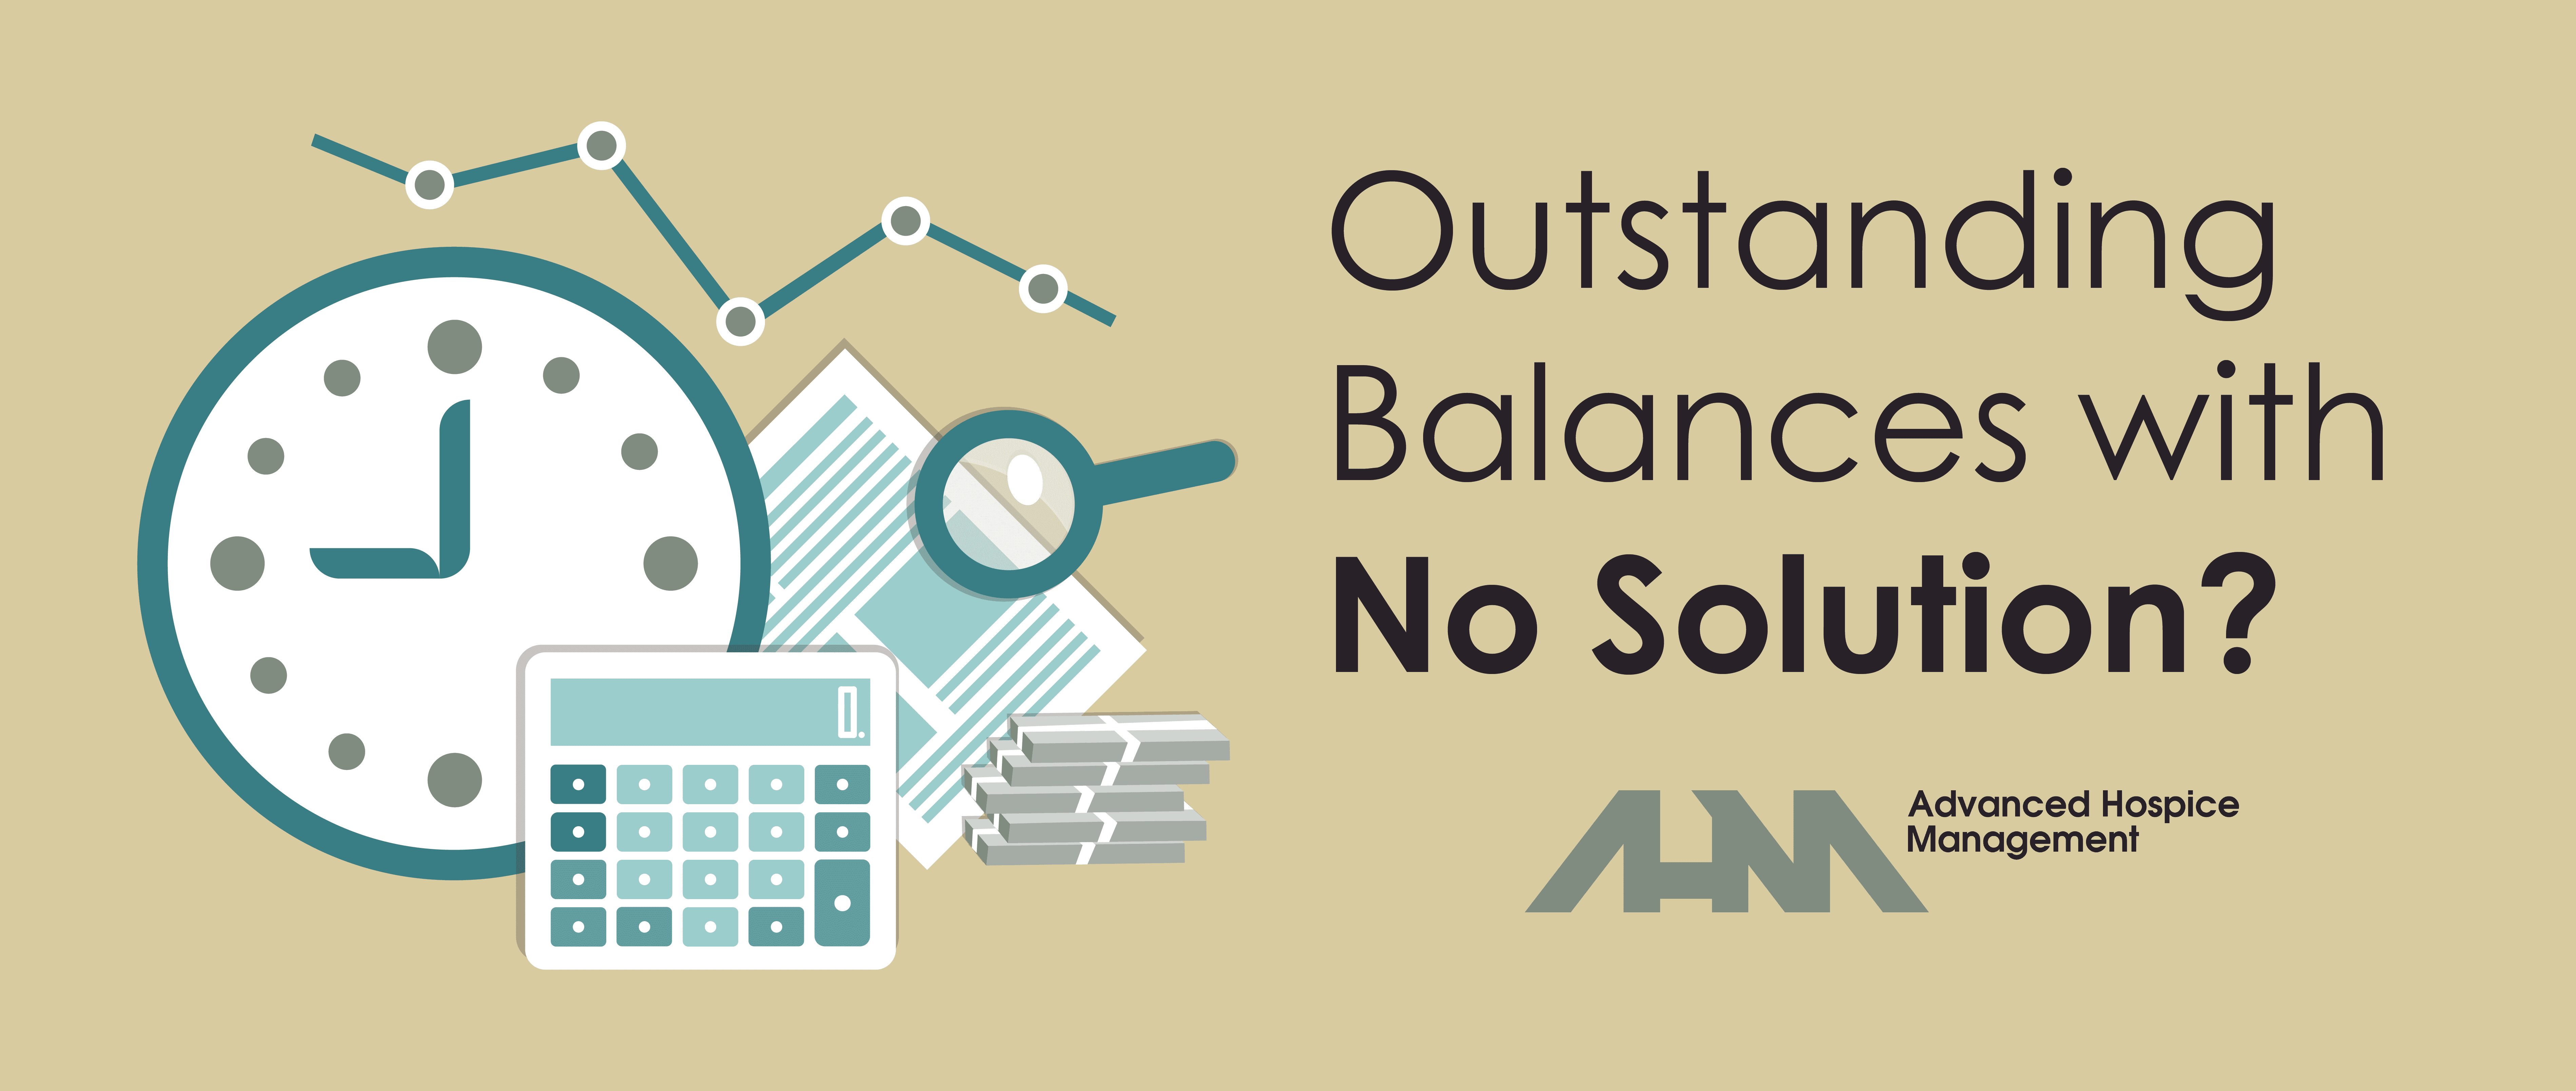 Outstanding Balances without Solution